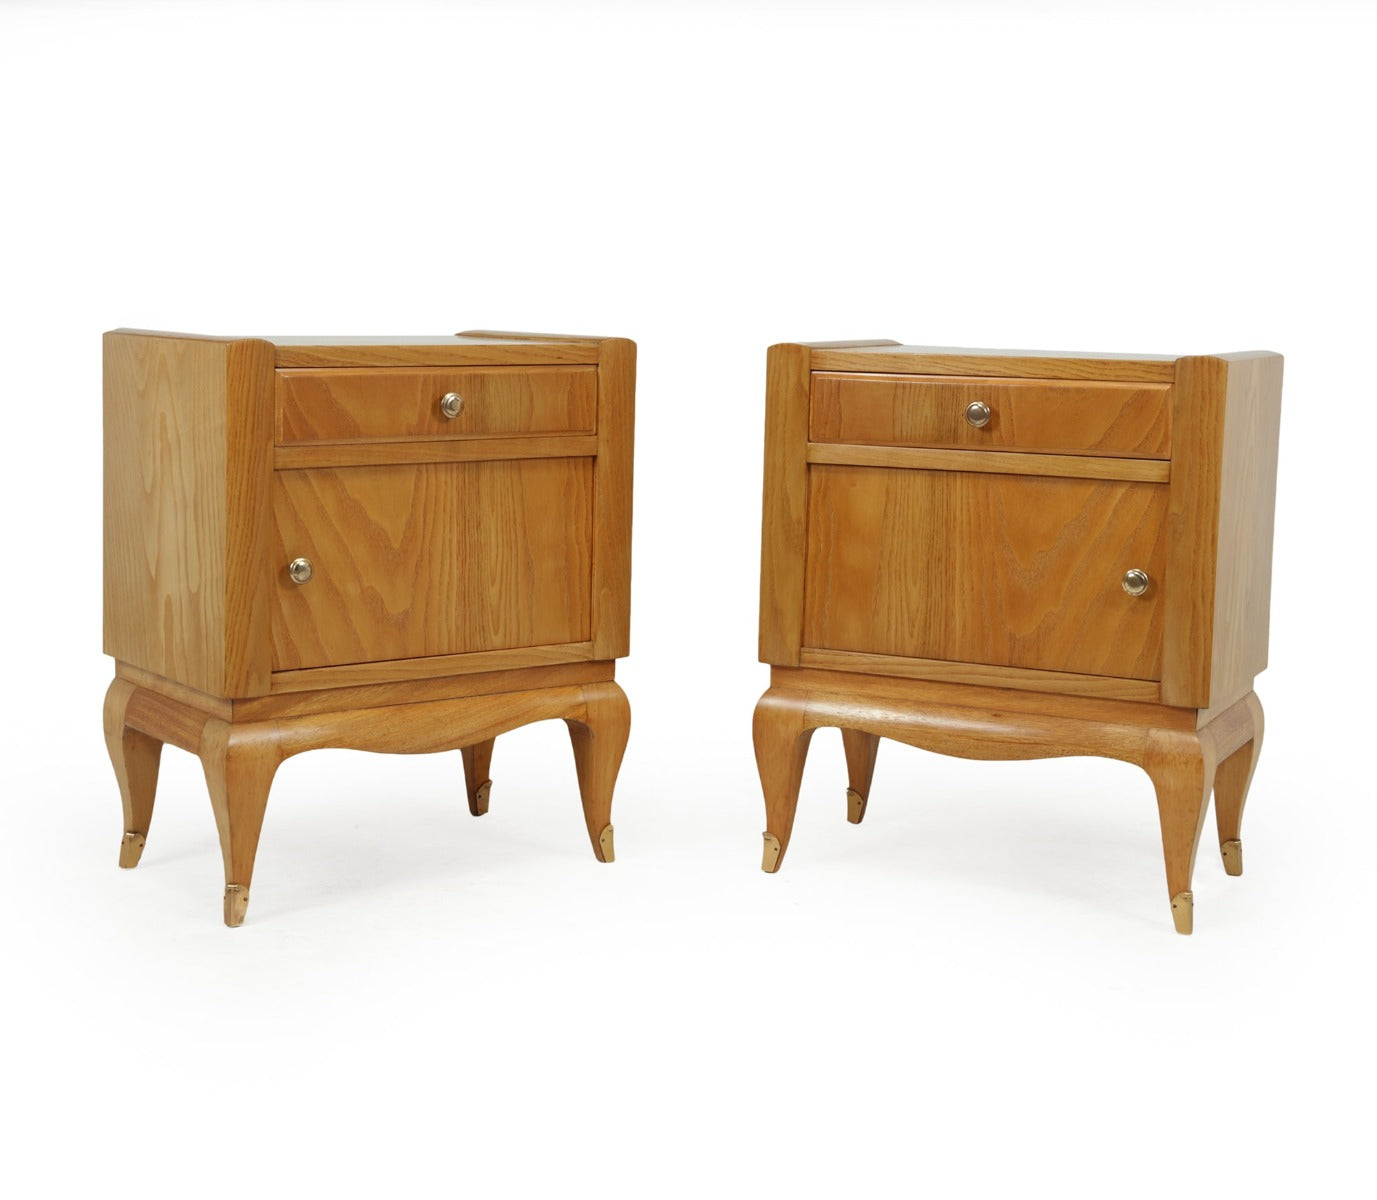 French Art Deco Bedside Cabinets in Cherry